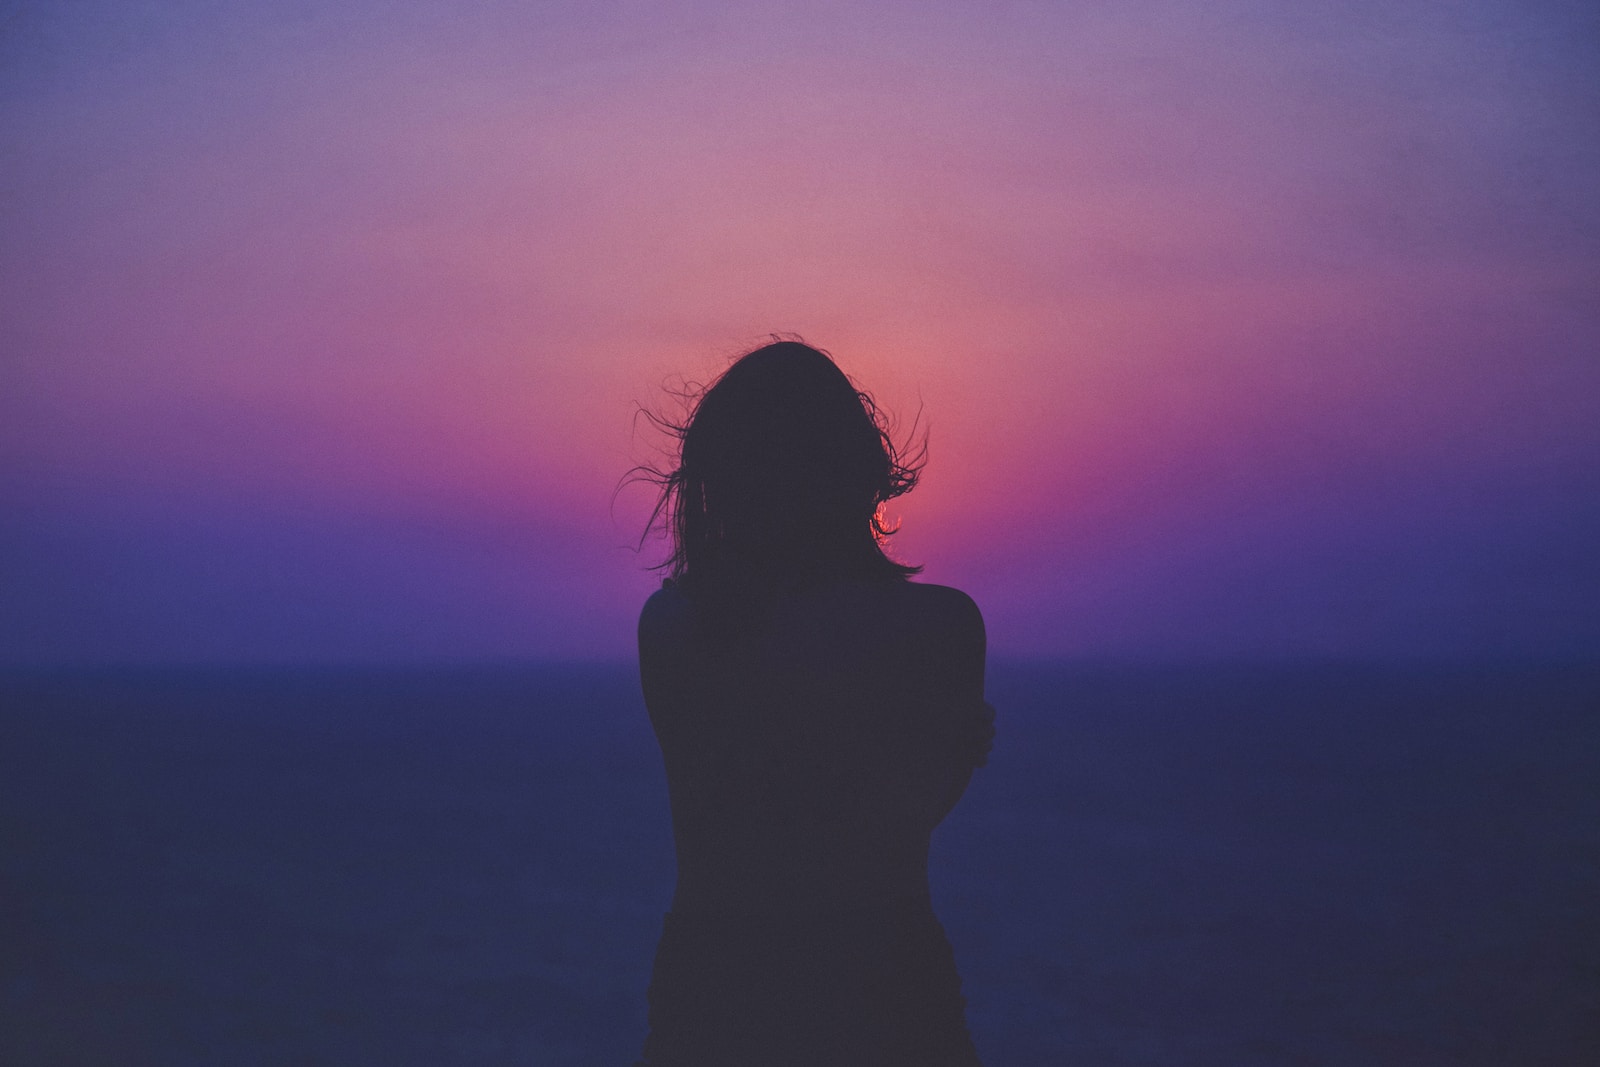 Why You Are Lost In Loneliness, Based On Your Zodiac Sign